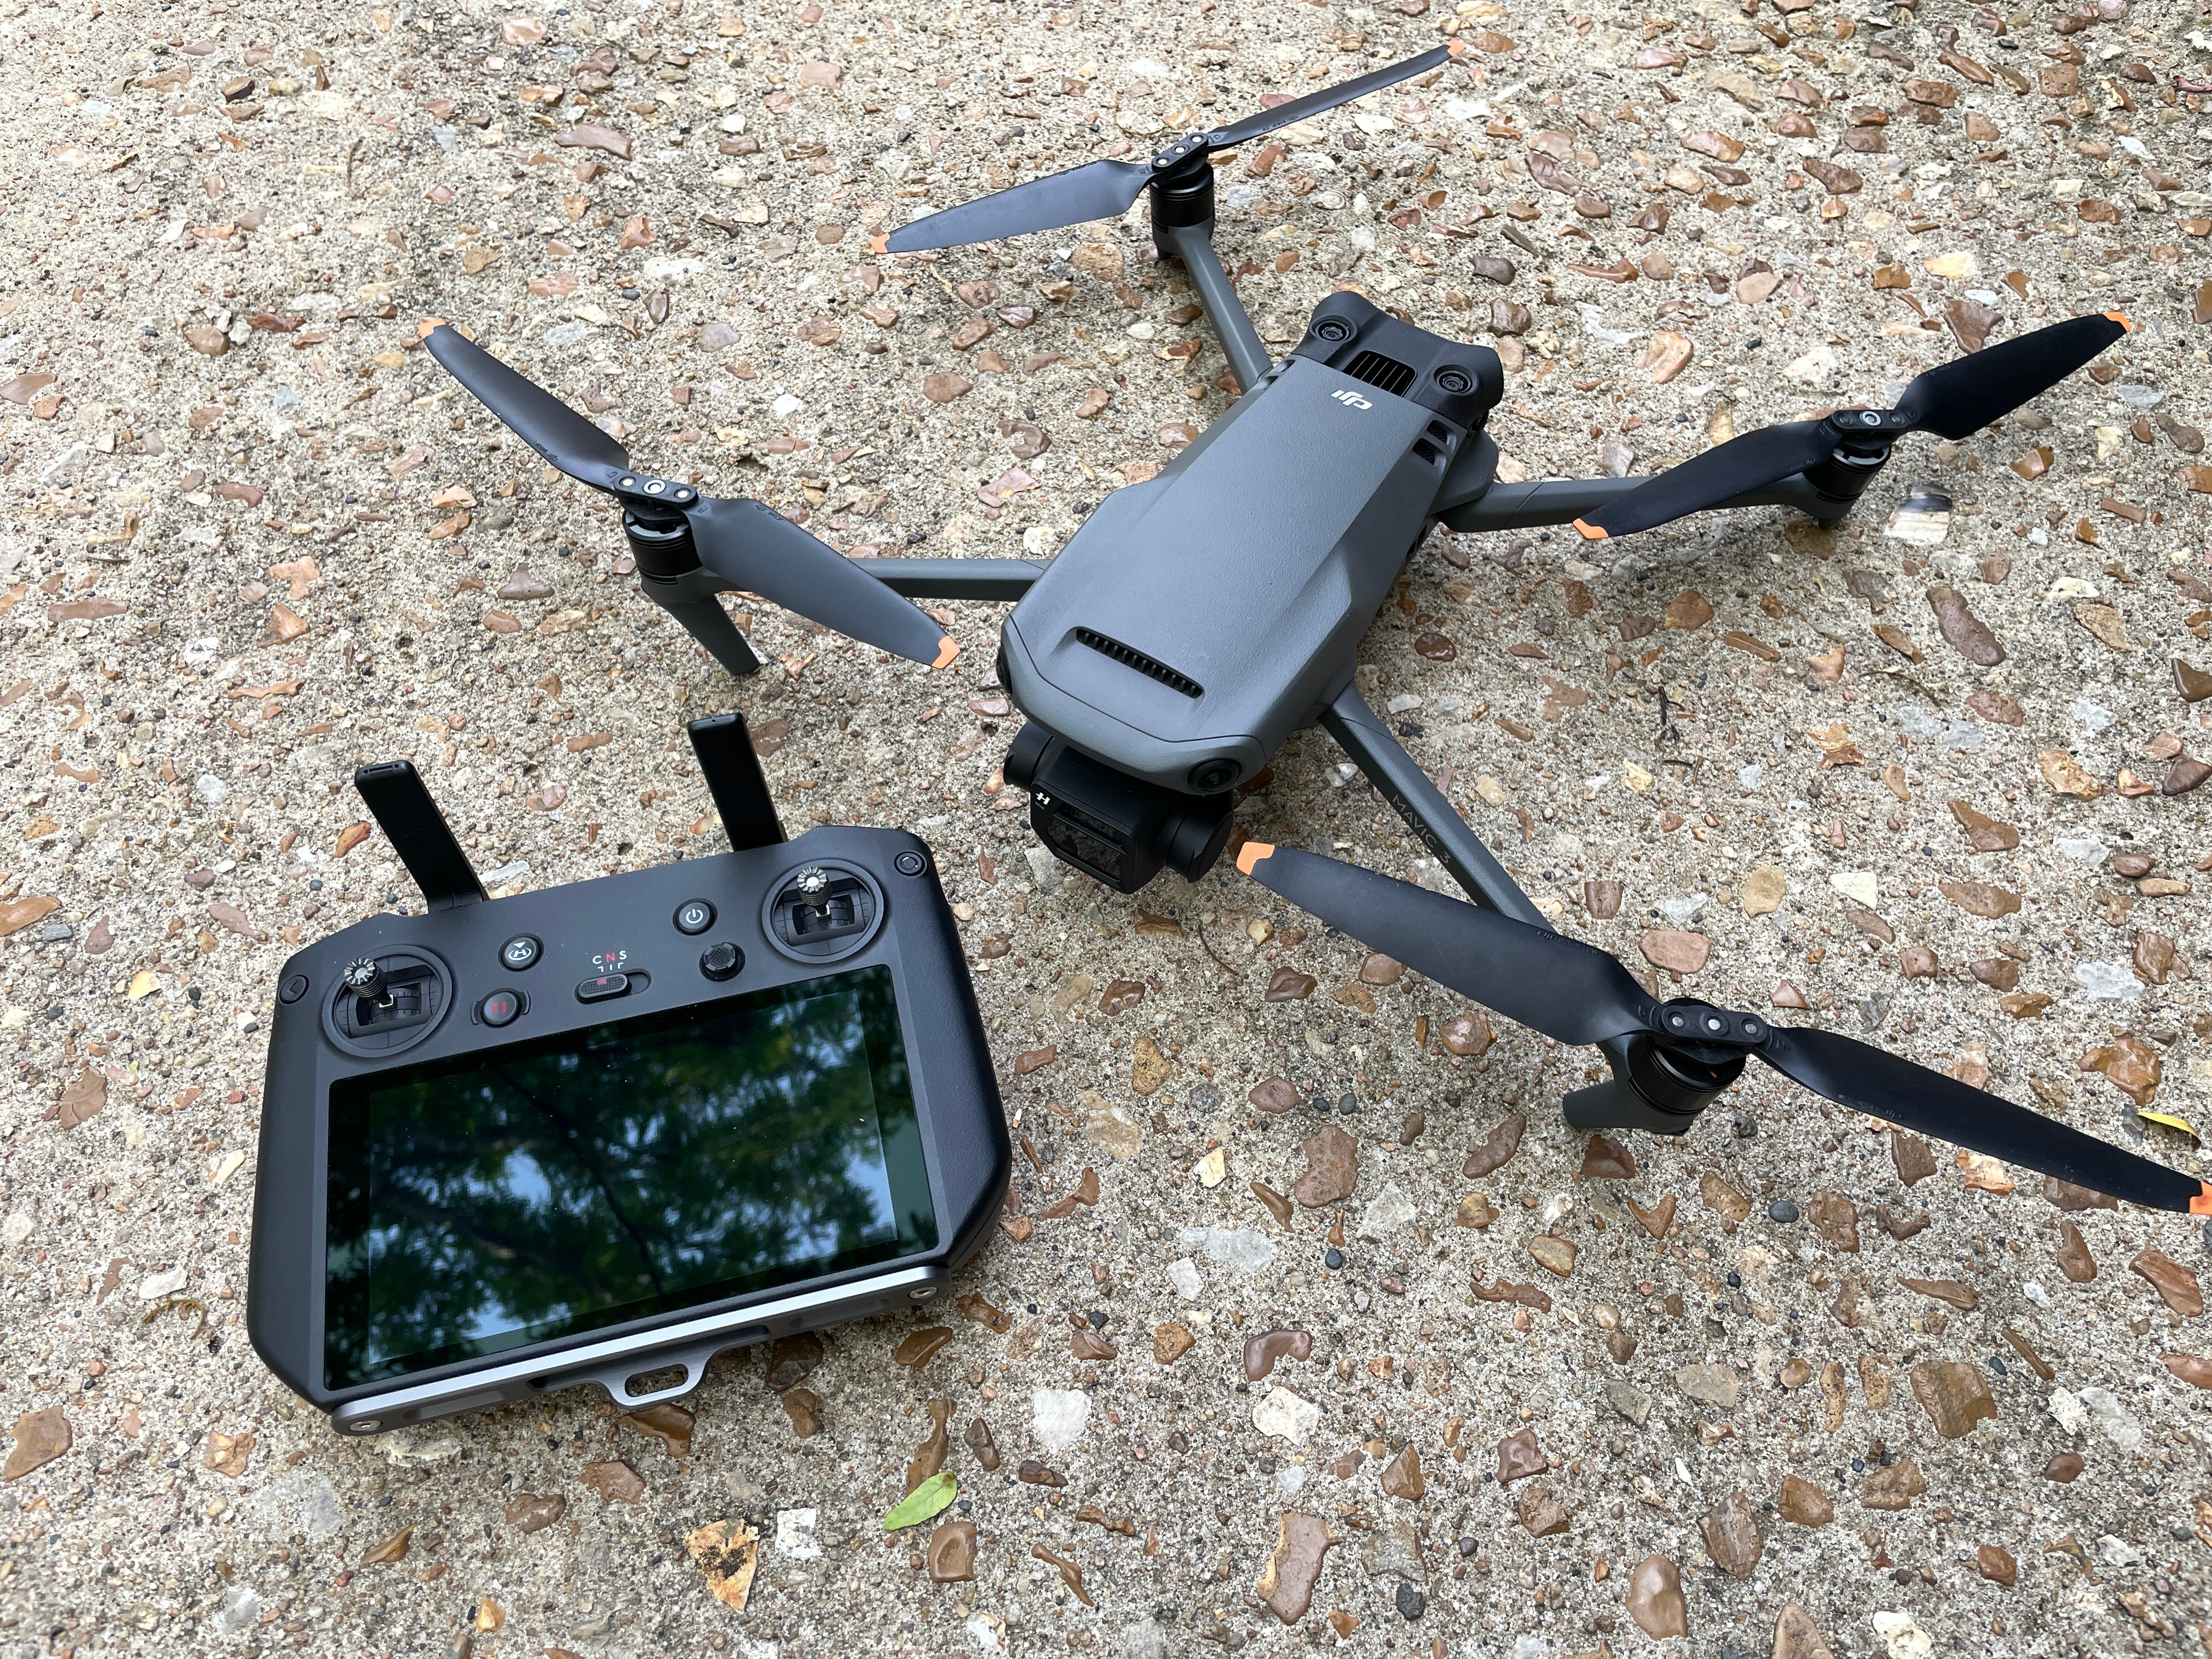 MDC drone and controller